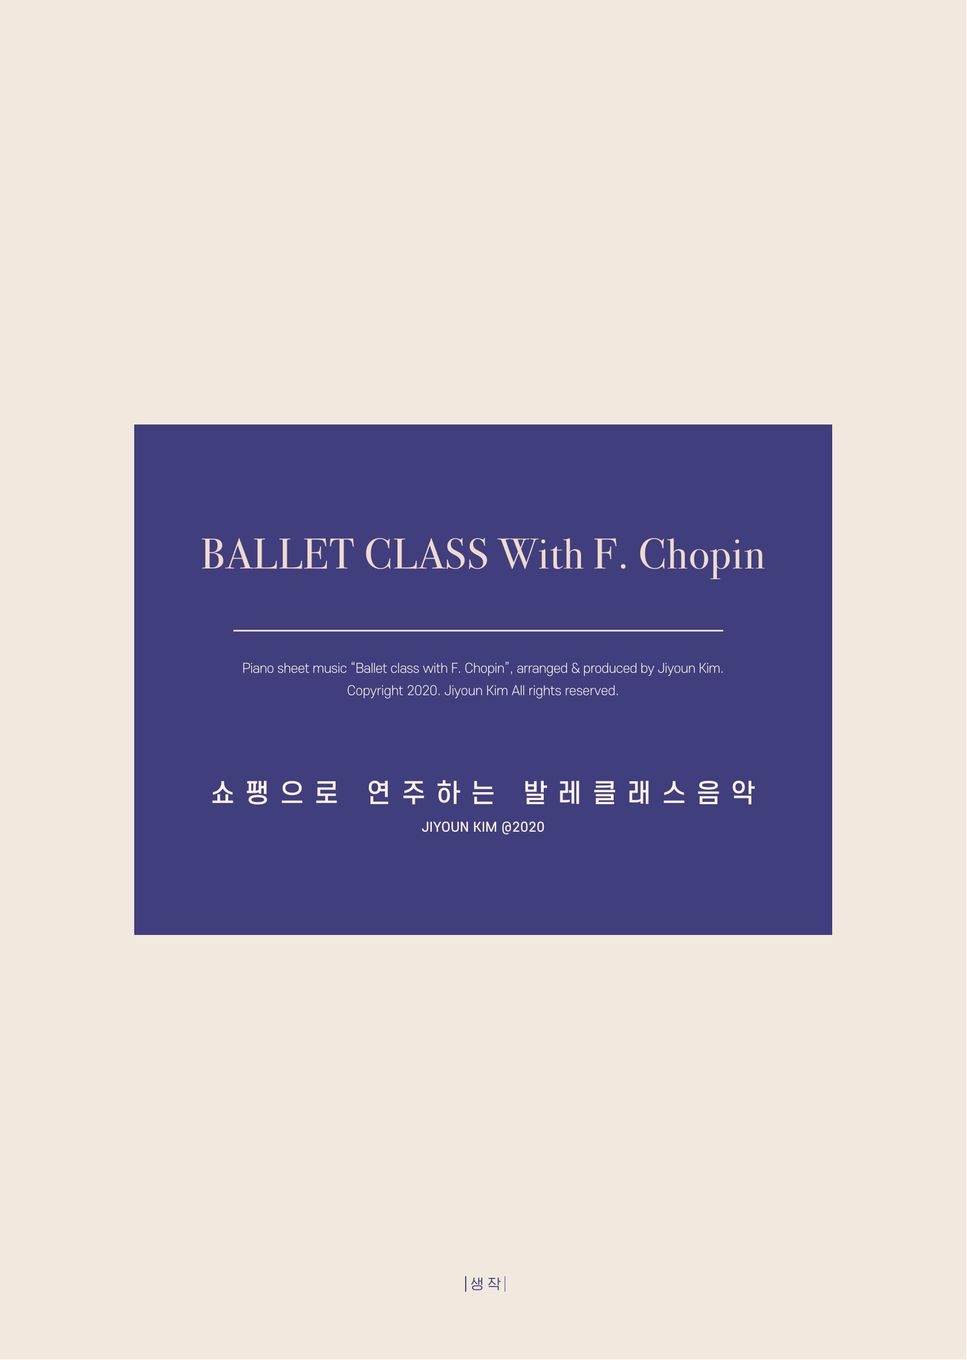 F. Chopin - Ballet Class with F. Chopin - 8. Rond de Jambe a terre by Jiyoun KIM